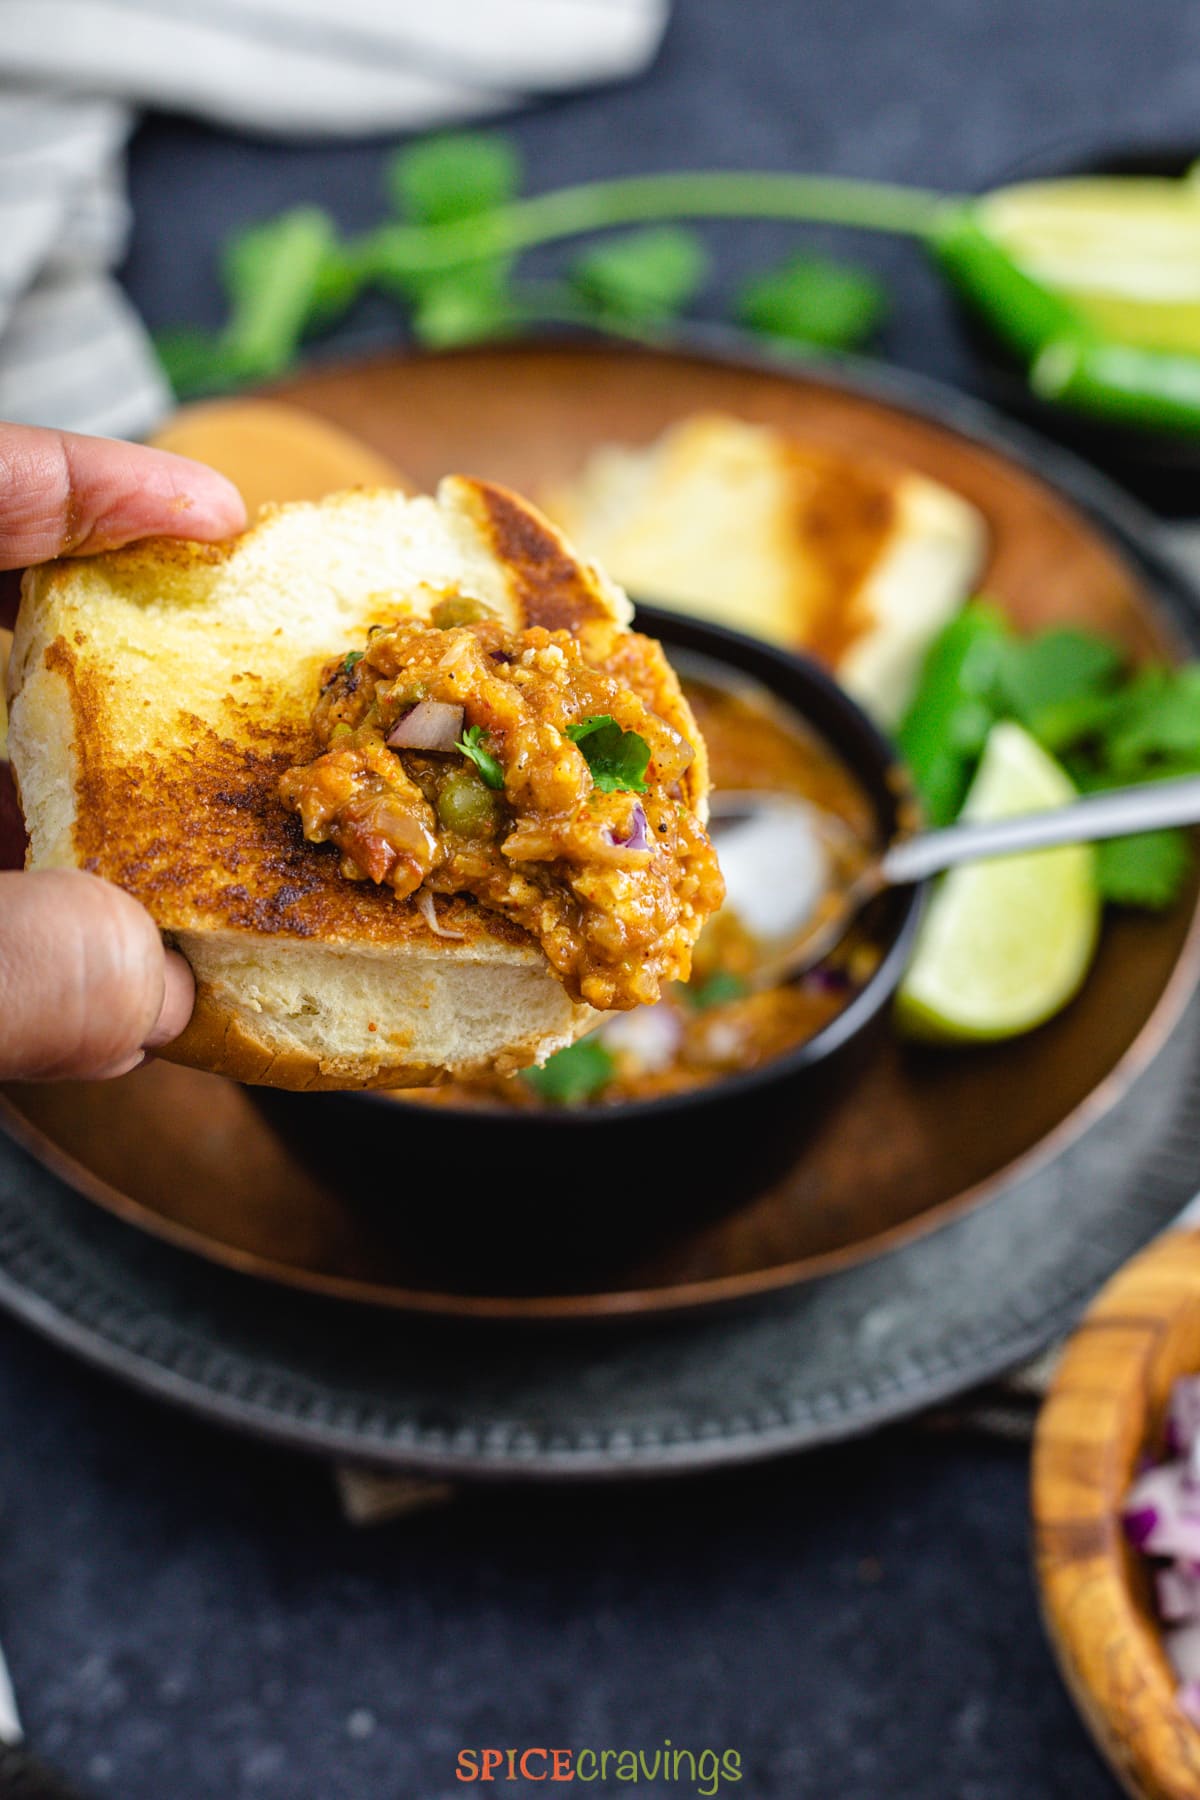 Vegetable curry on toasted bread